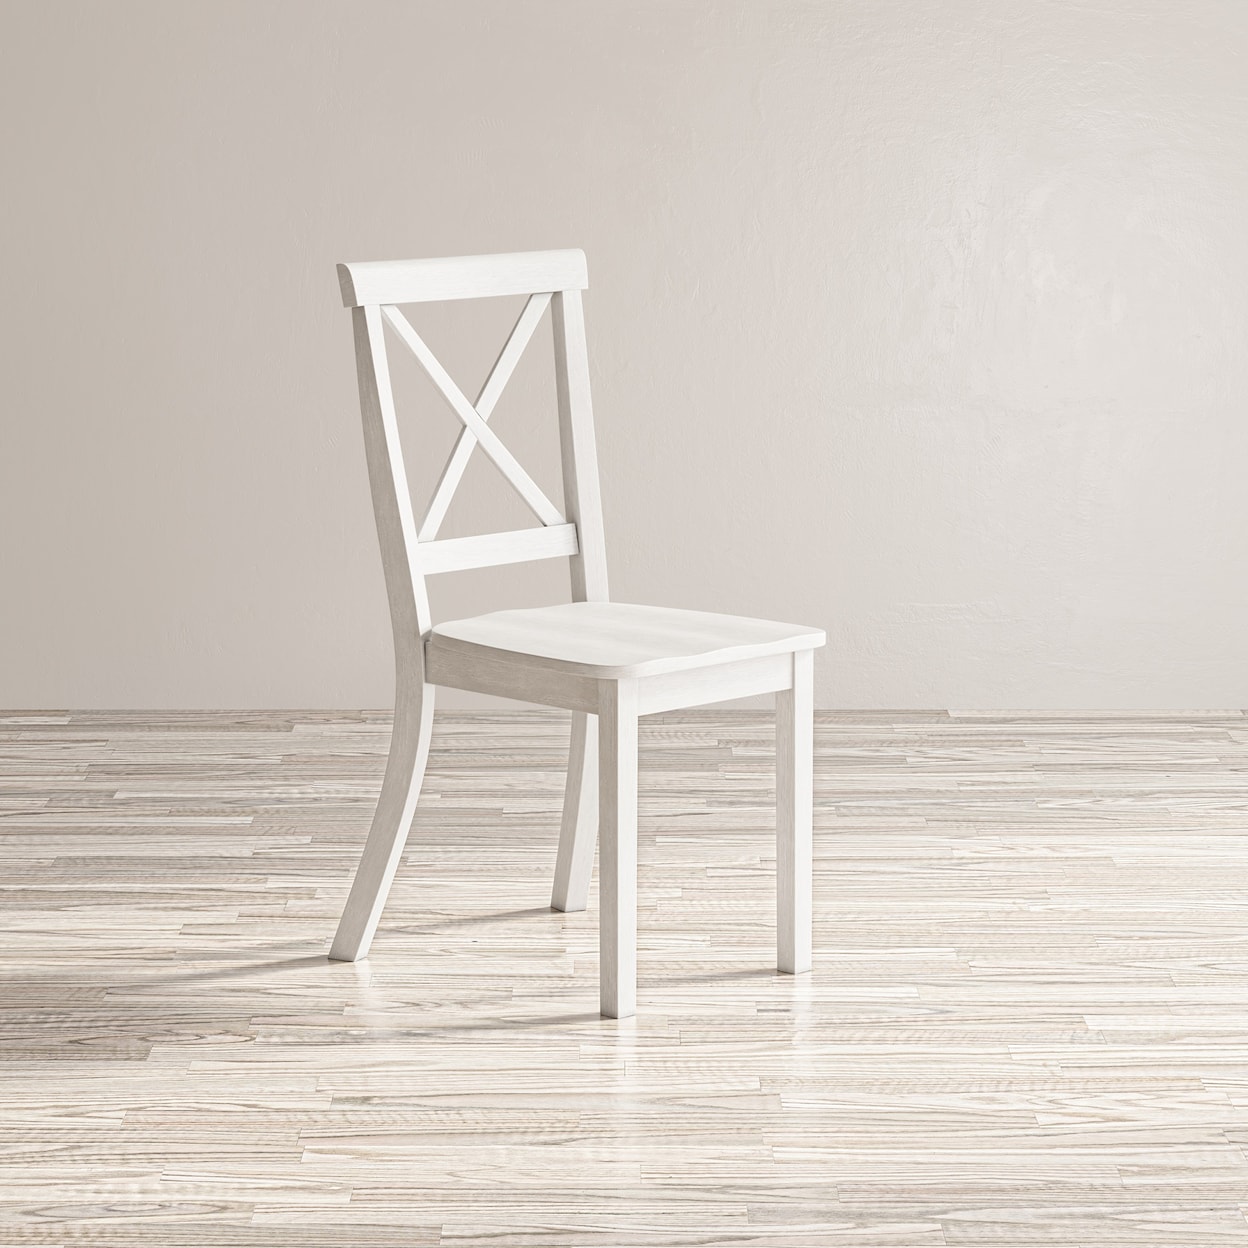 Belfort Essentials Eastern Tides X Back Dining Chair